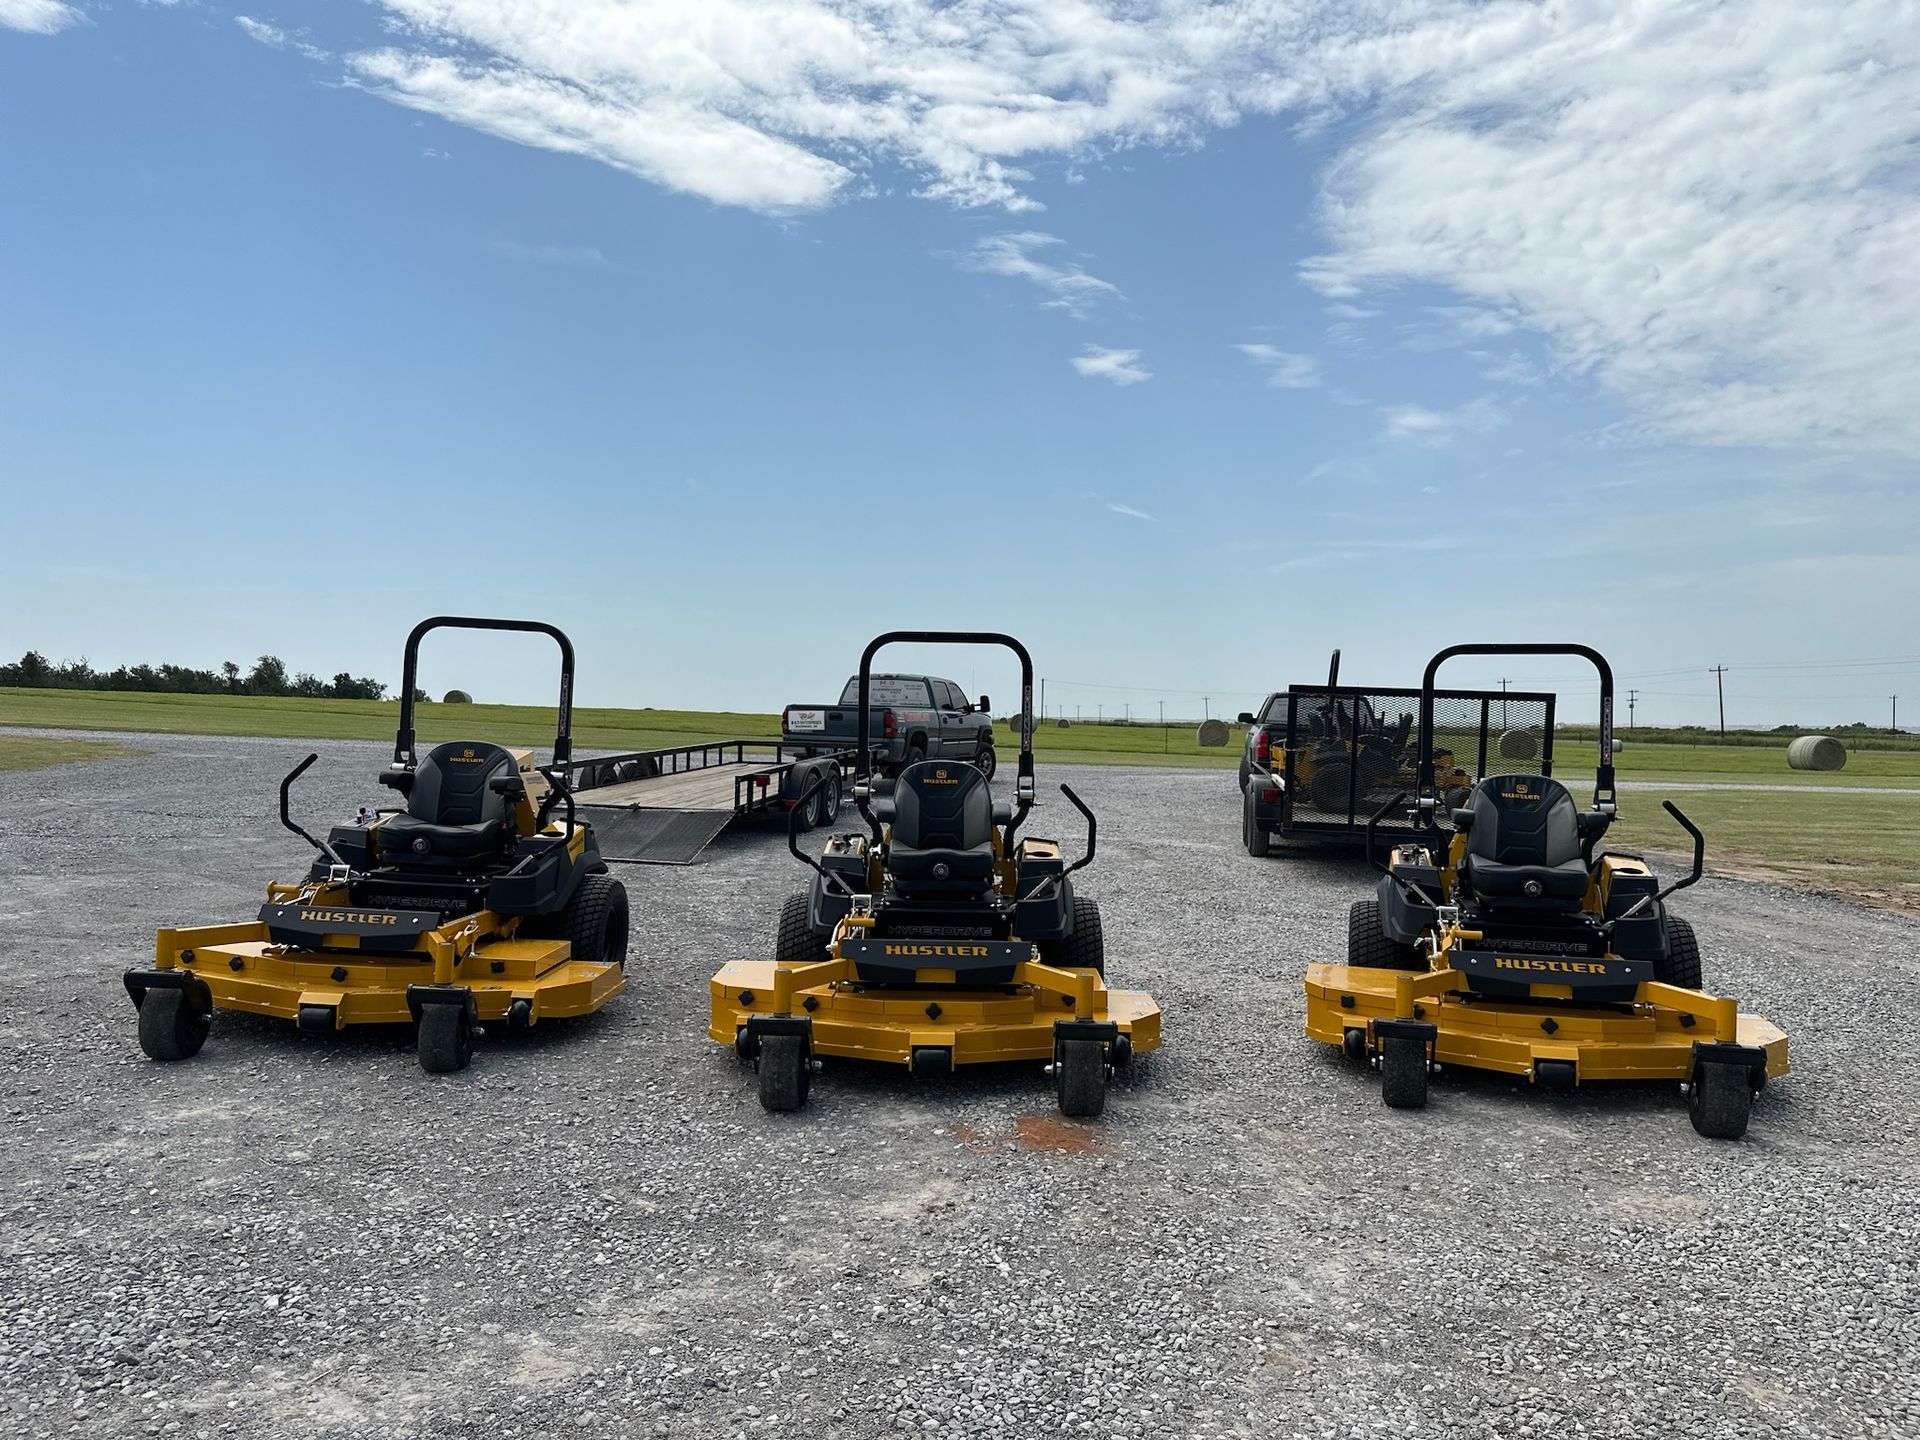 three yellow lawn mowers are parked in a gravel lot .